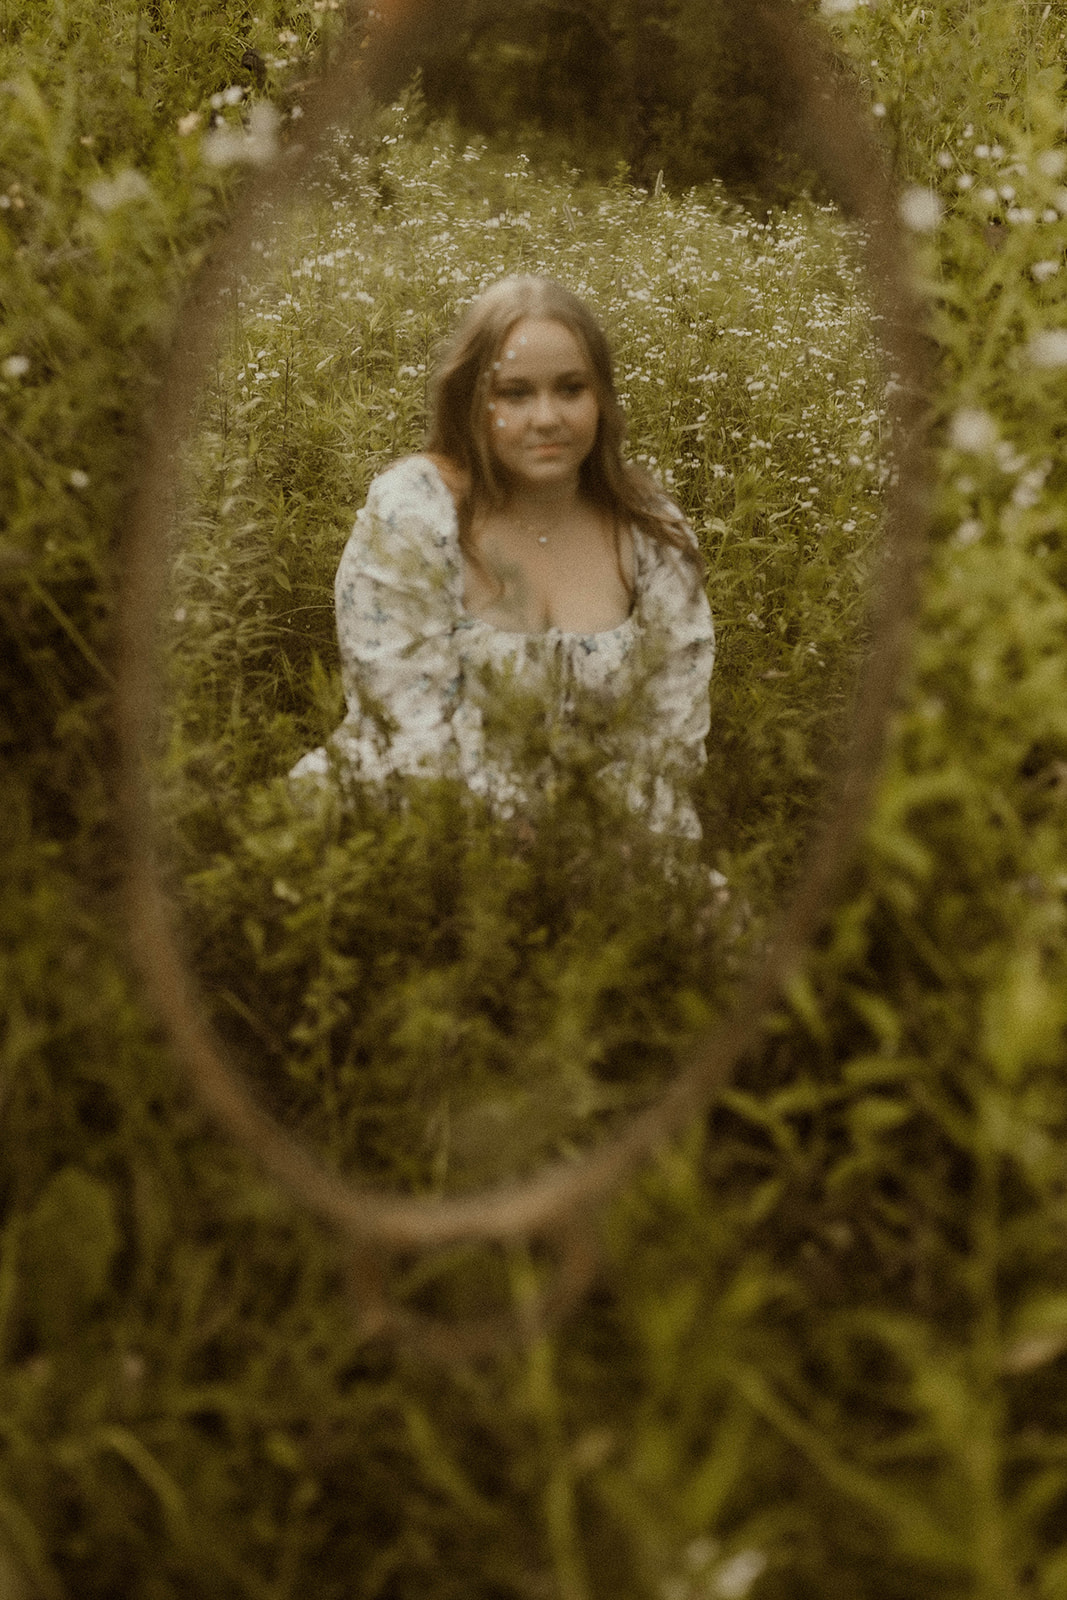 stunning young lady takes creative self portraits with a mirror in a wildflower field